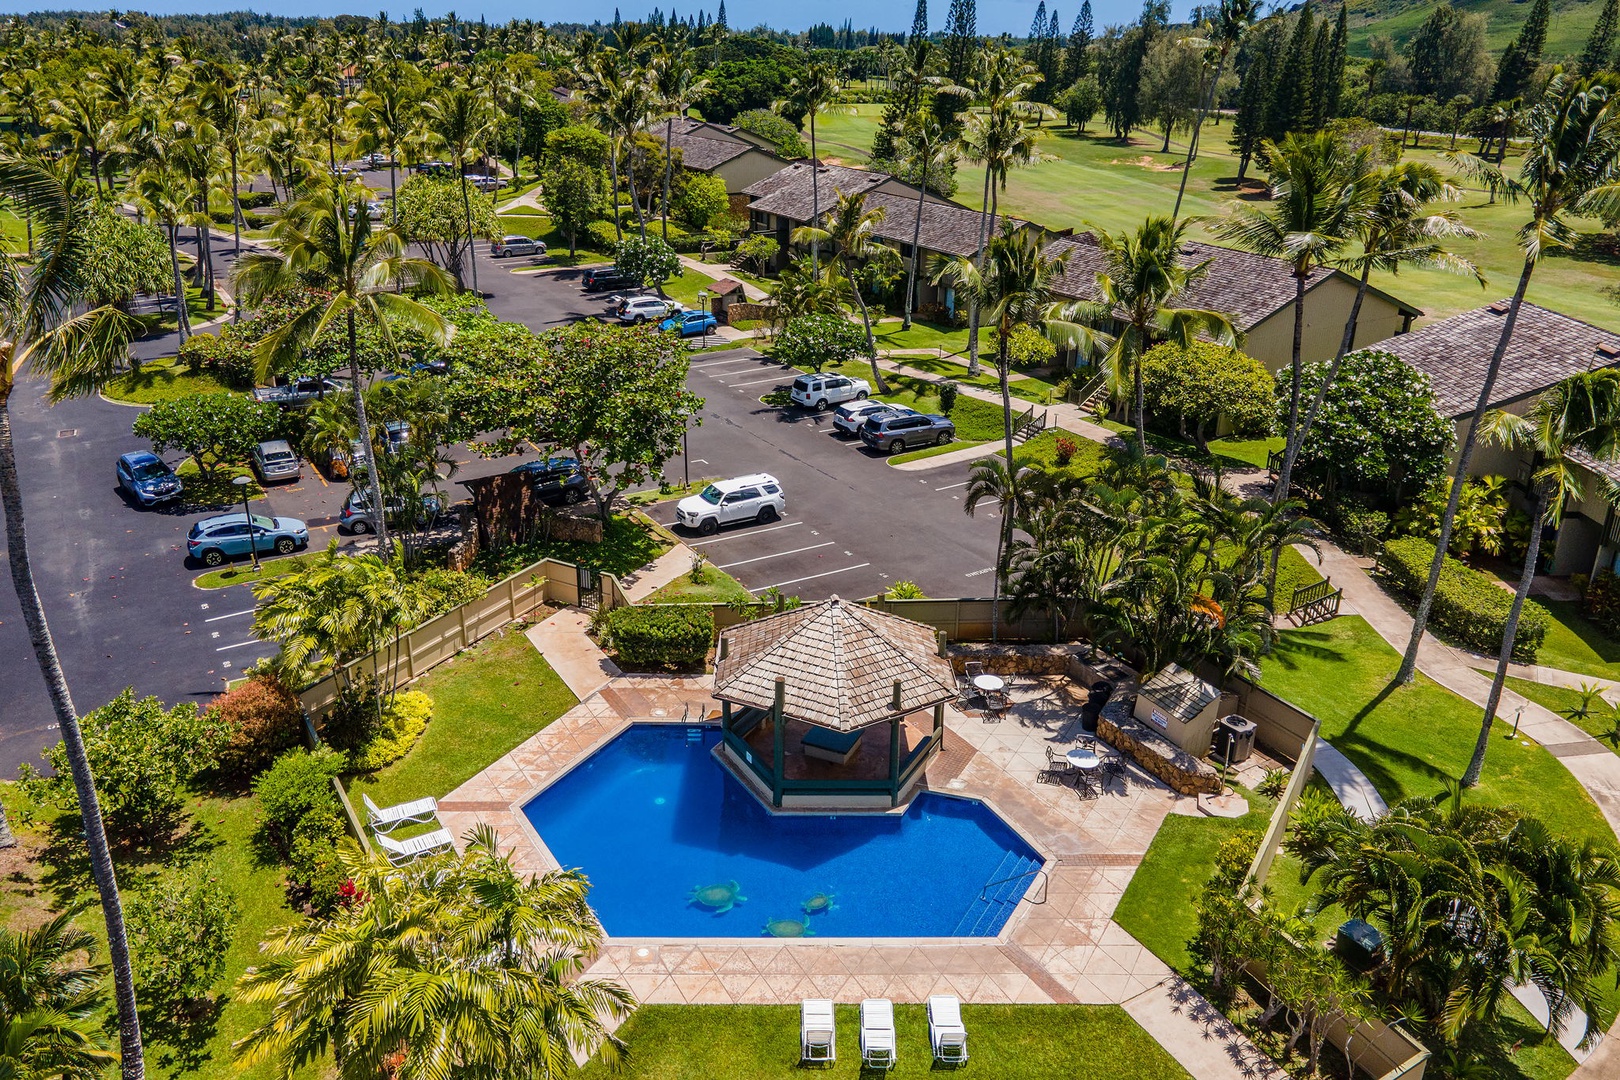 Kahuku Vacation Rentals, Turtle Bay's Kuilima Estates West #104 - The community has ample amenities like the pool and BBQ area